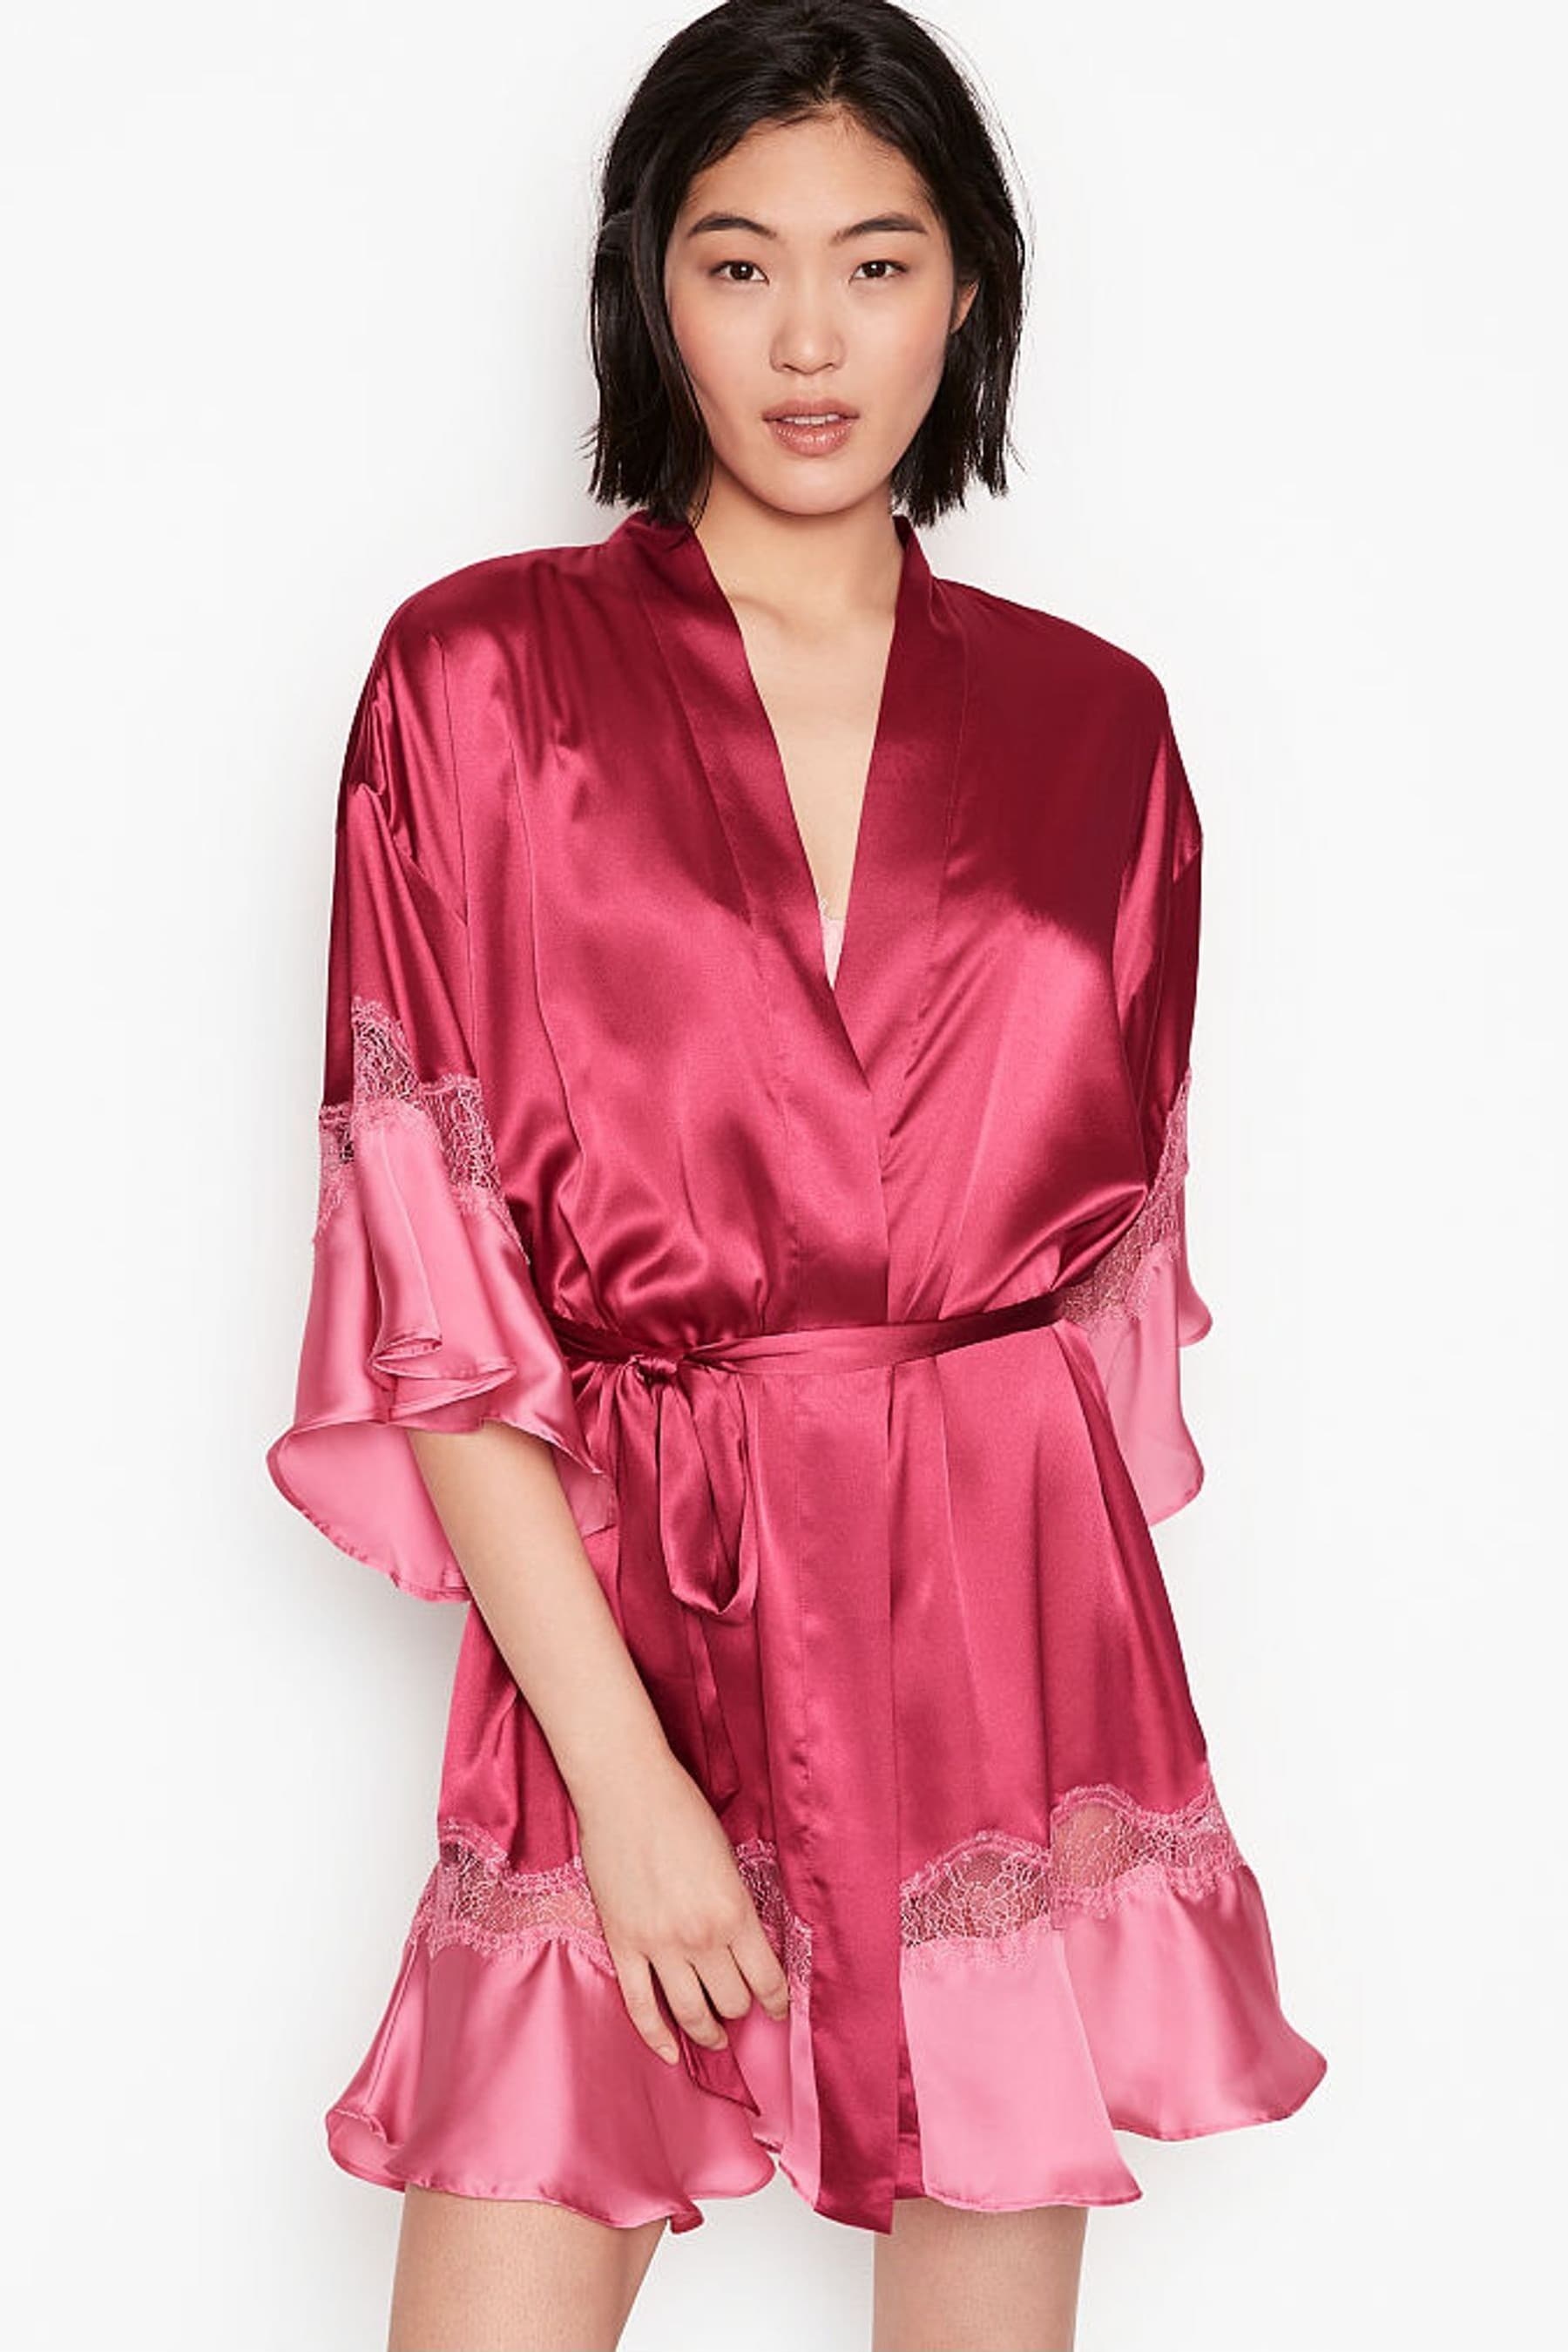 Buy Victoria's Secret Flounce Dressing Gown from the Next UK online shop